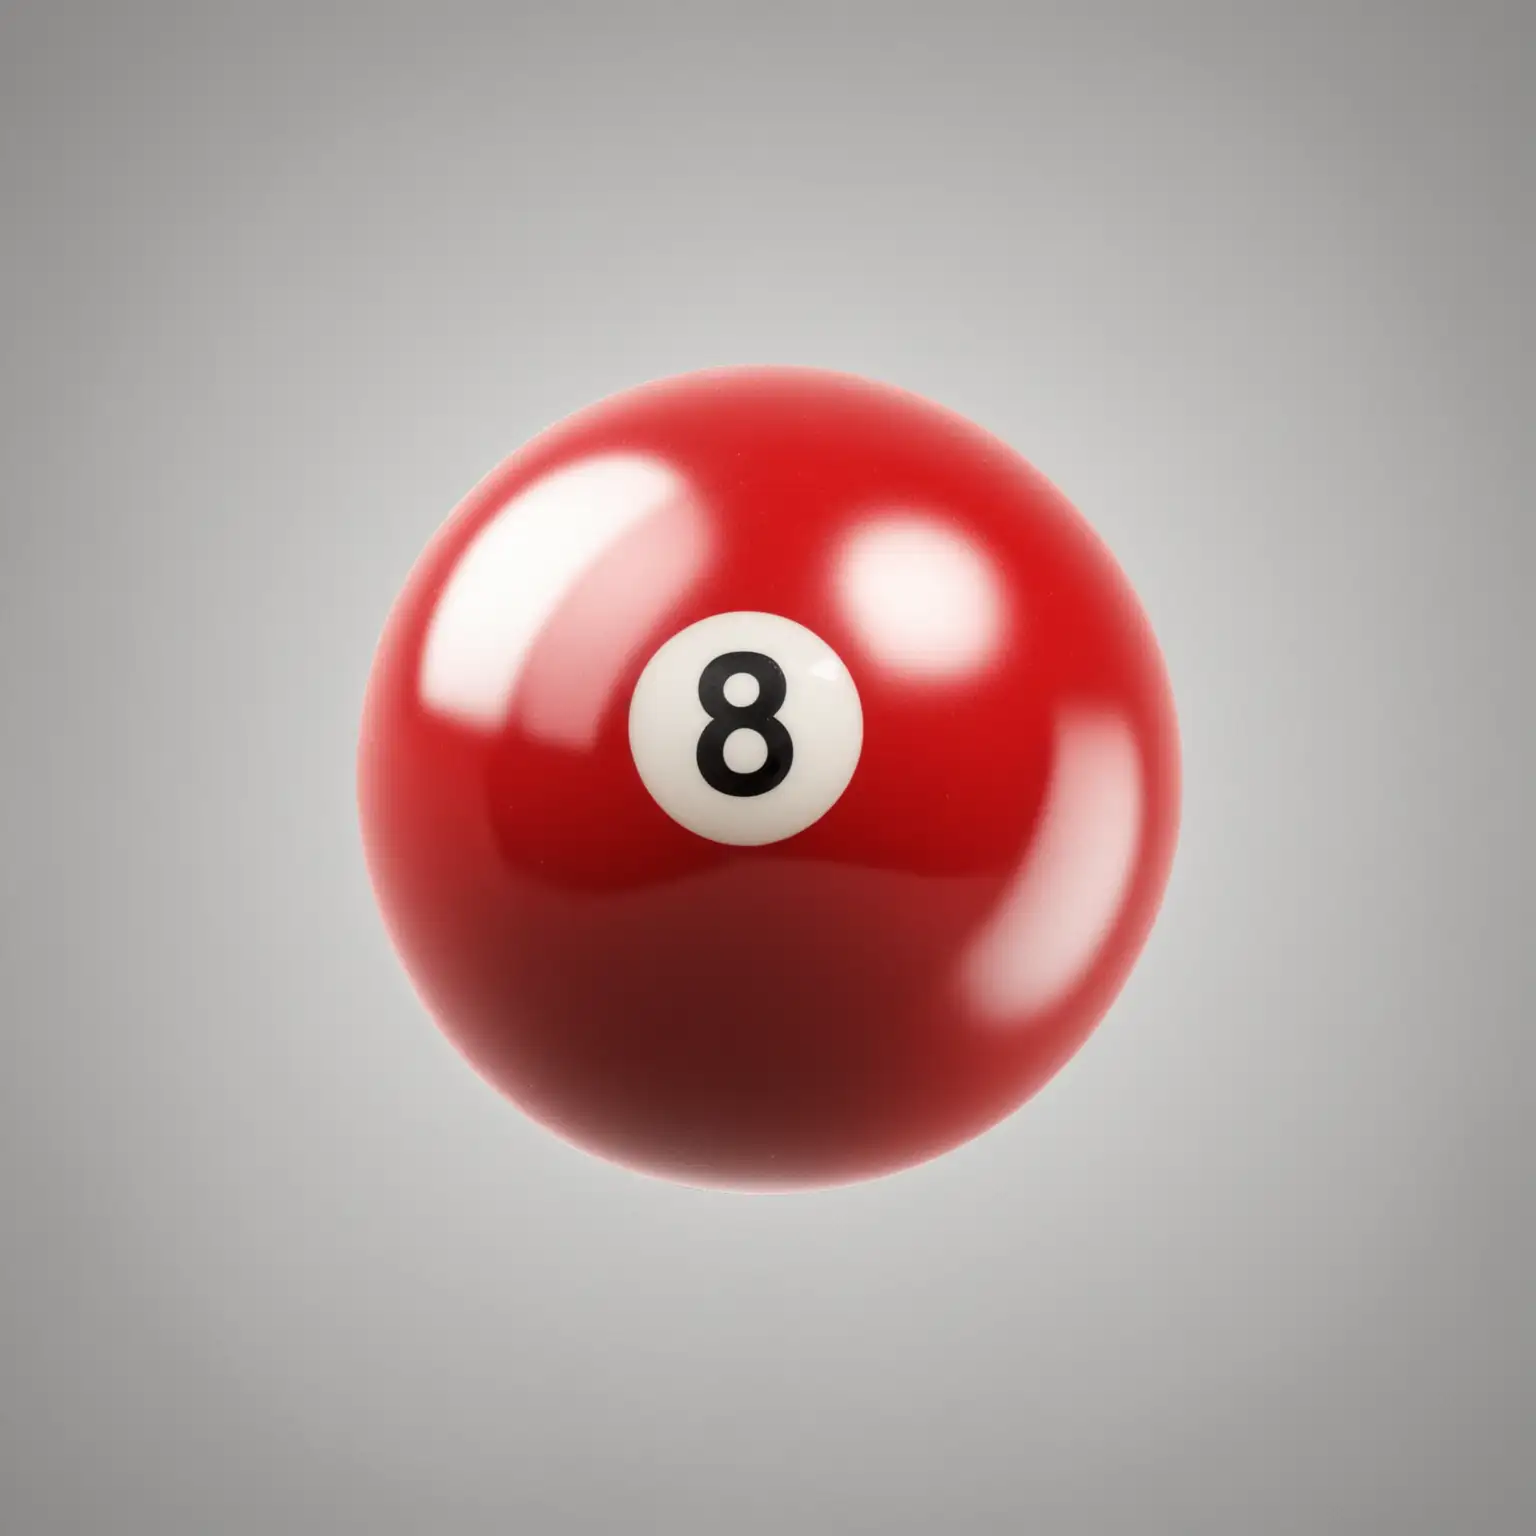 hyper realistic red number no hard lighting 7 billiard ball isolated great detailed floating on white solid background and no shadows behind
